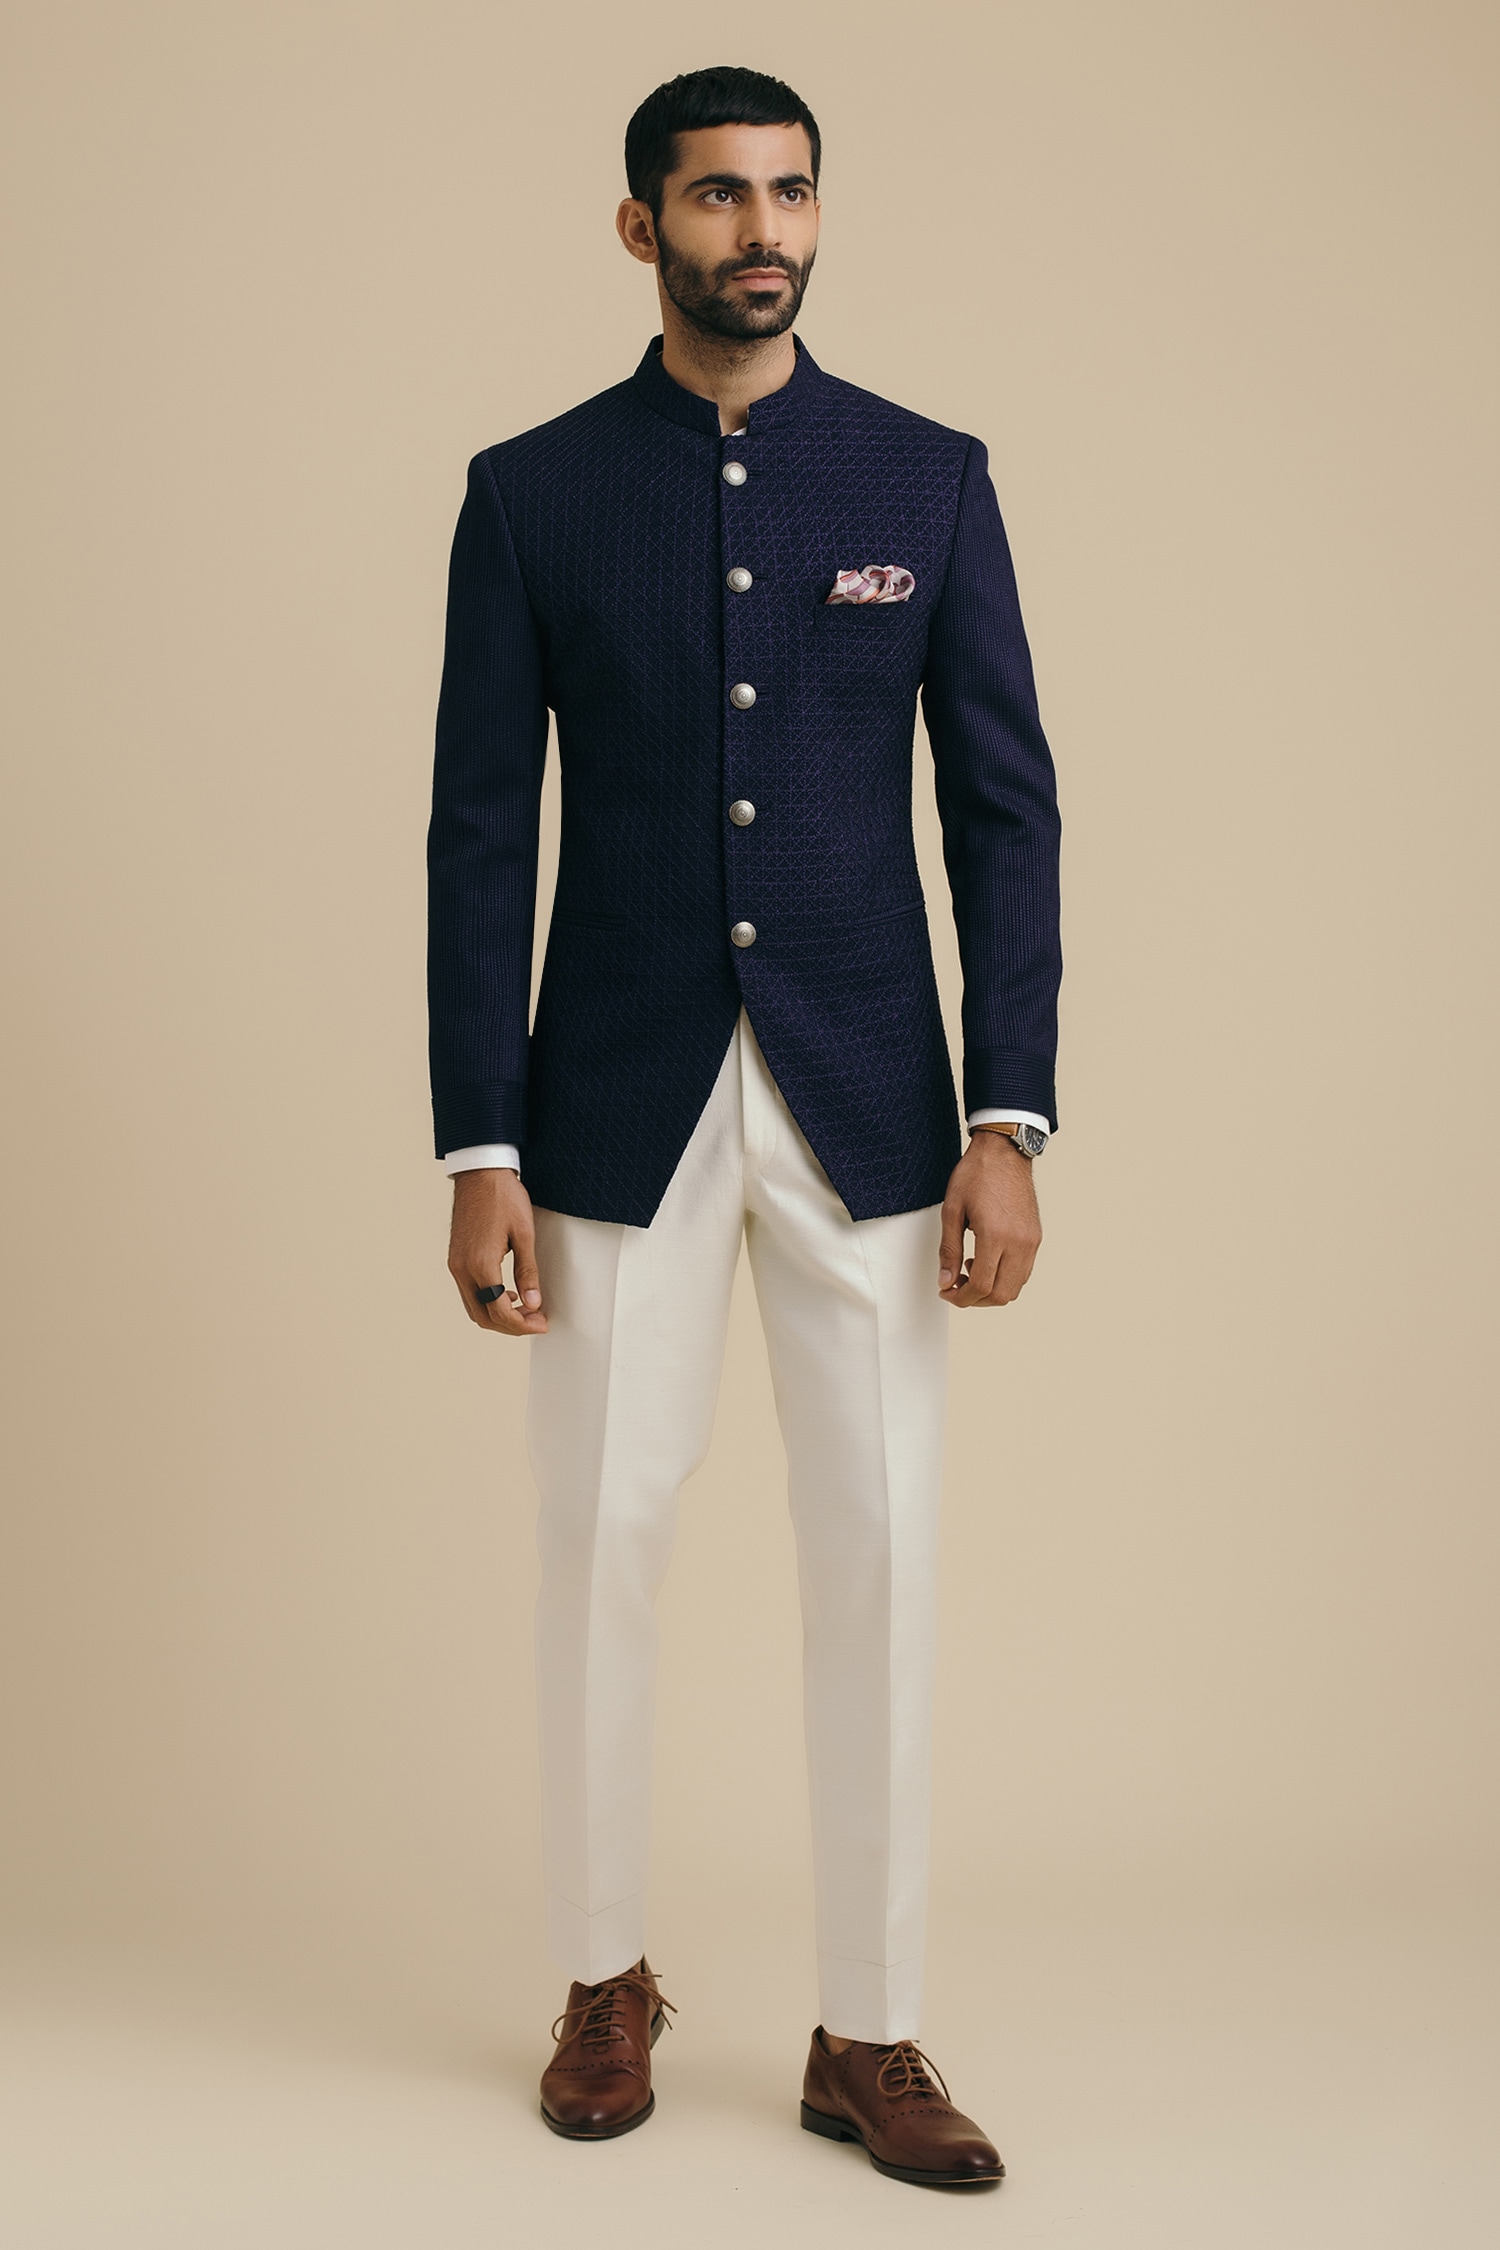 wedding outfits indowestern for men | Wedding dresses men indian, Wedding outfit  men, Wedding guest outfit